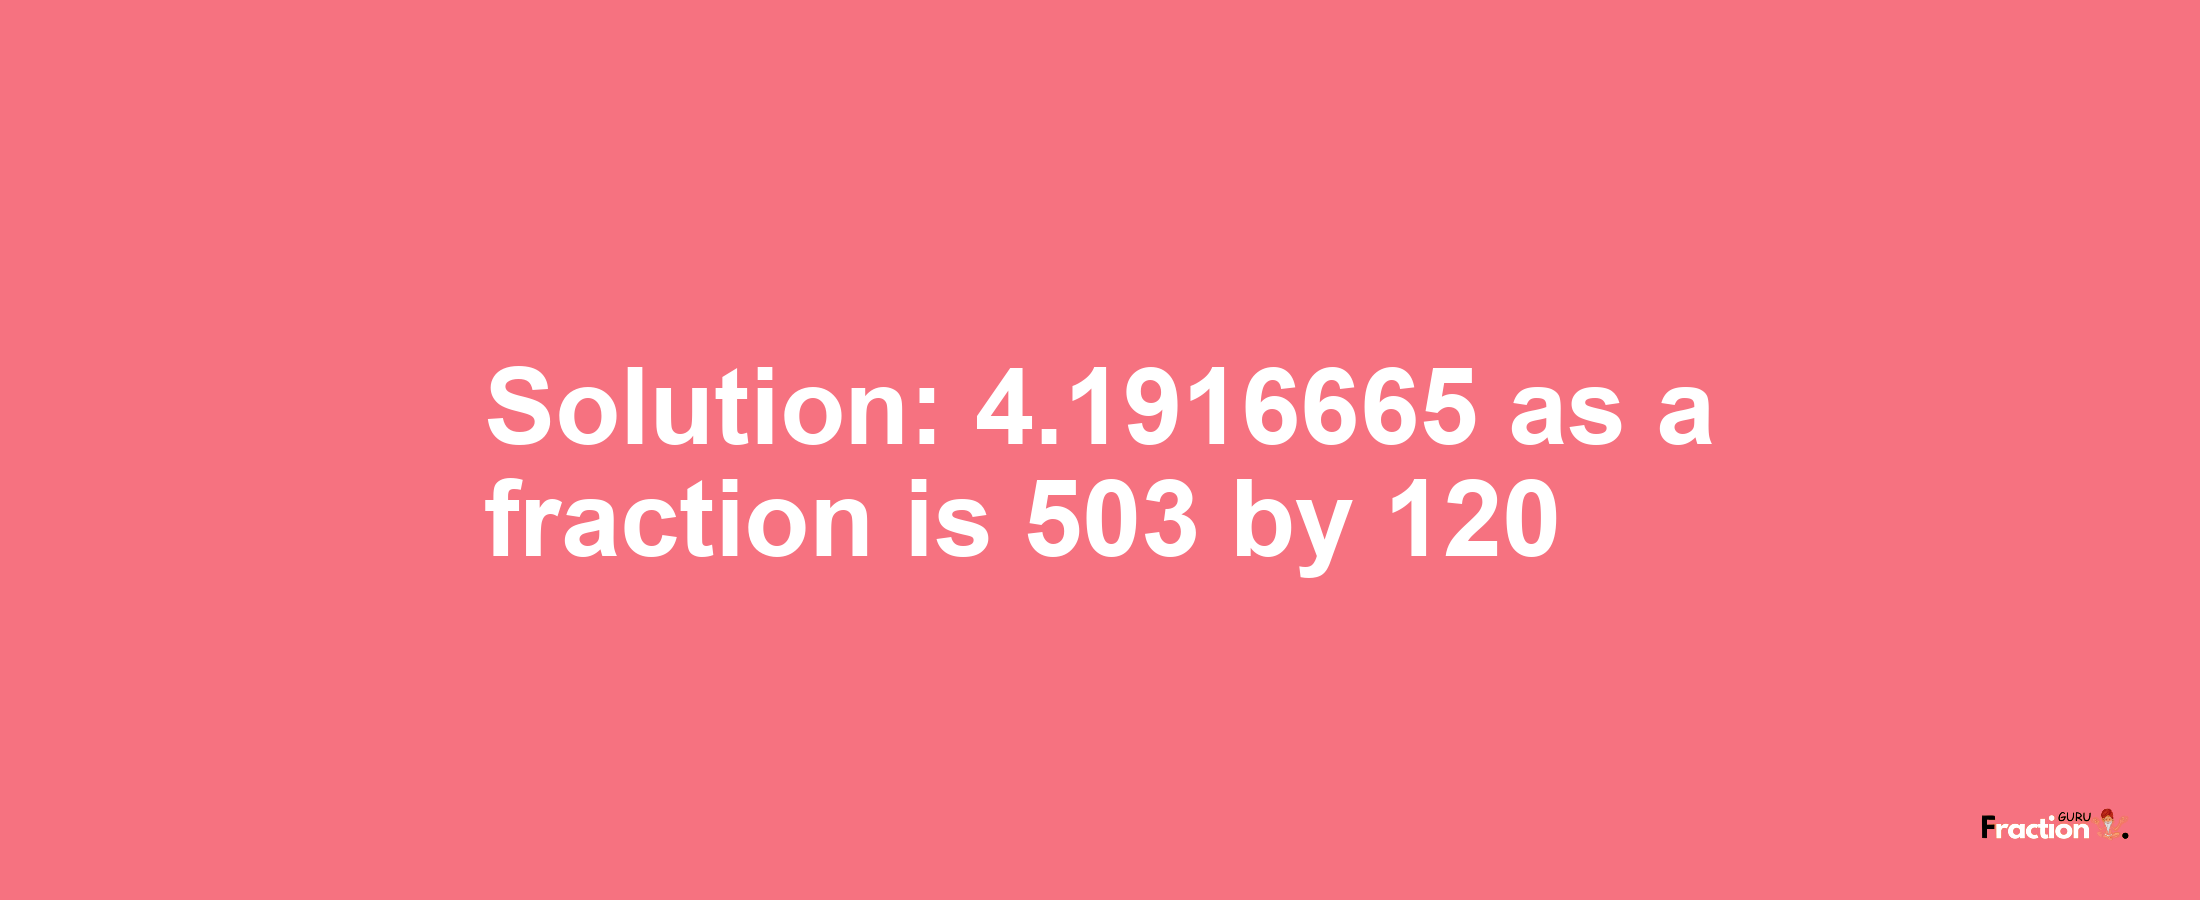 Solution:4.1916665 as a fraction is 503/120